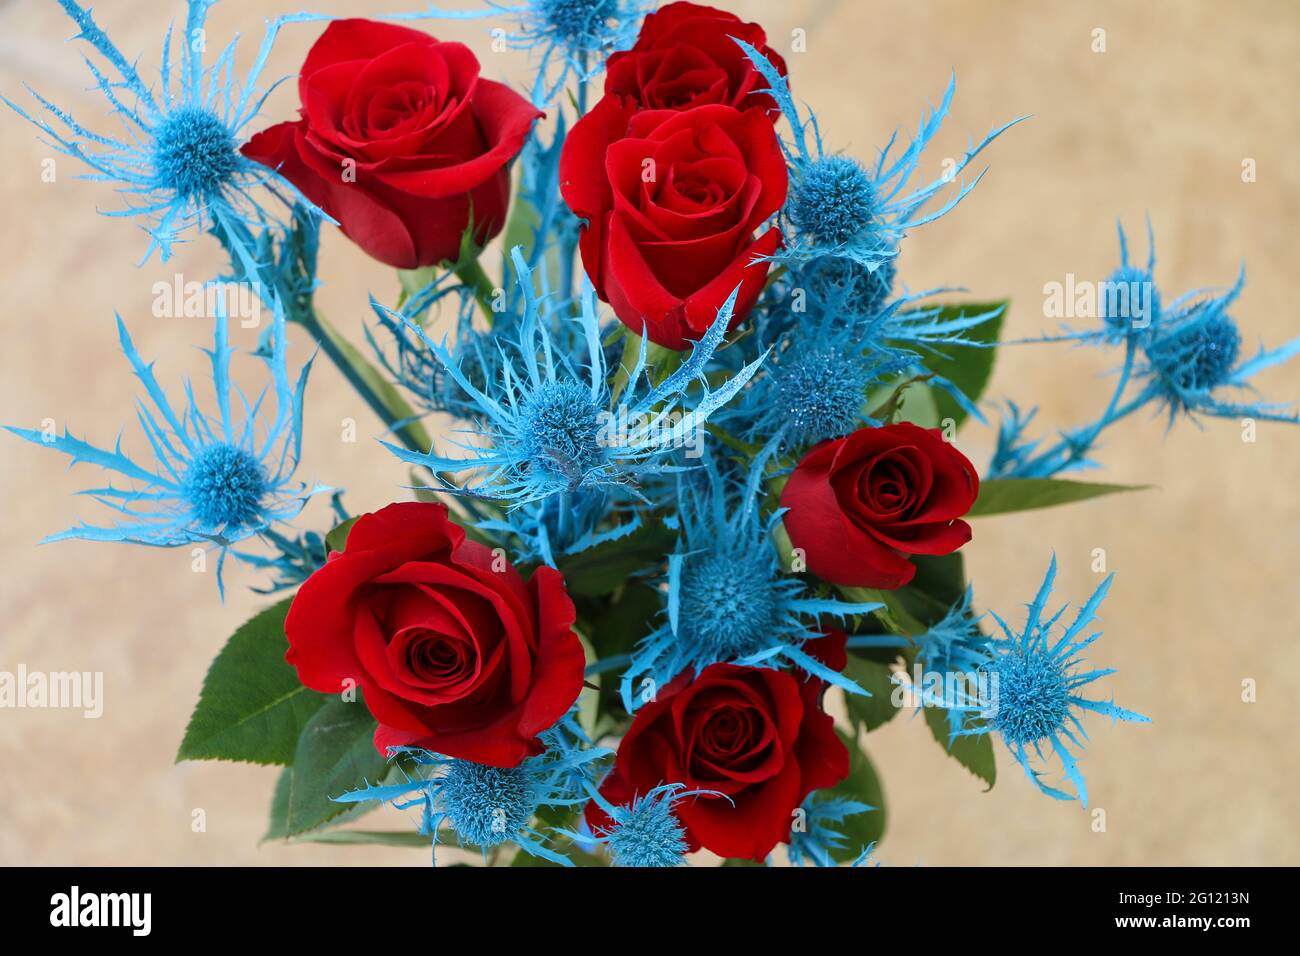 A Close-up of Six Deep Red Roses with Alpine Sea Holly Centered in Image. Stock Photo